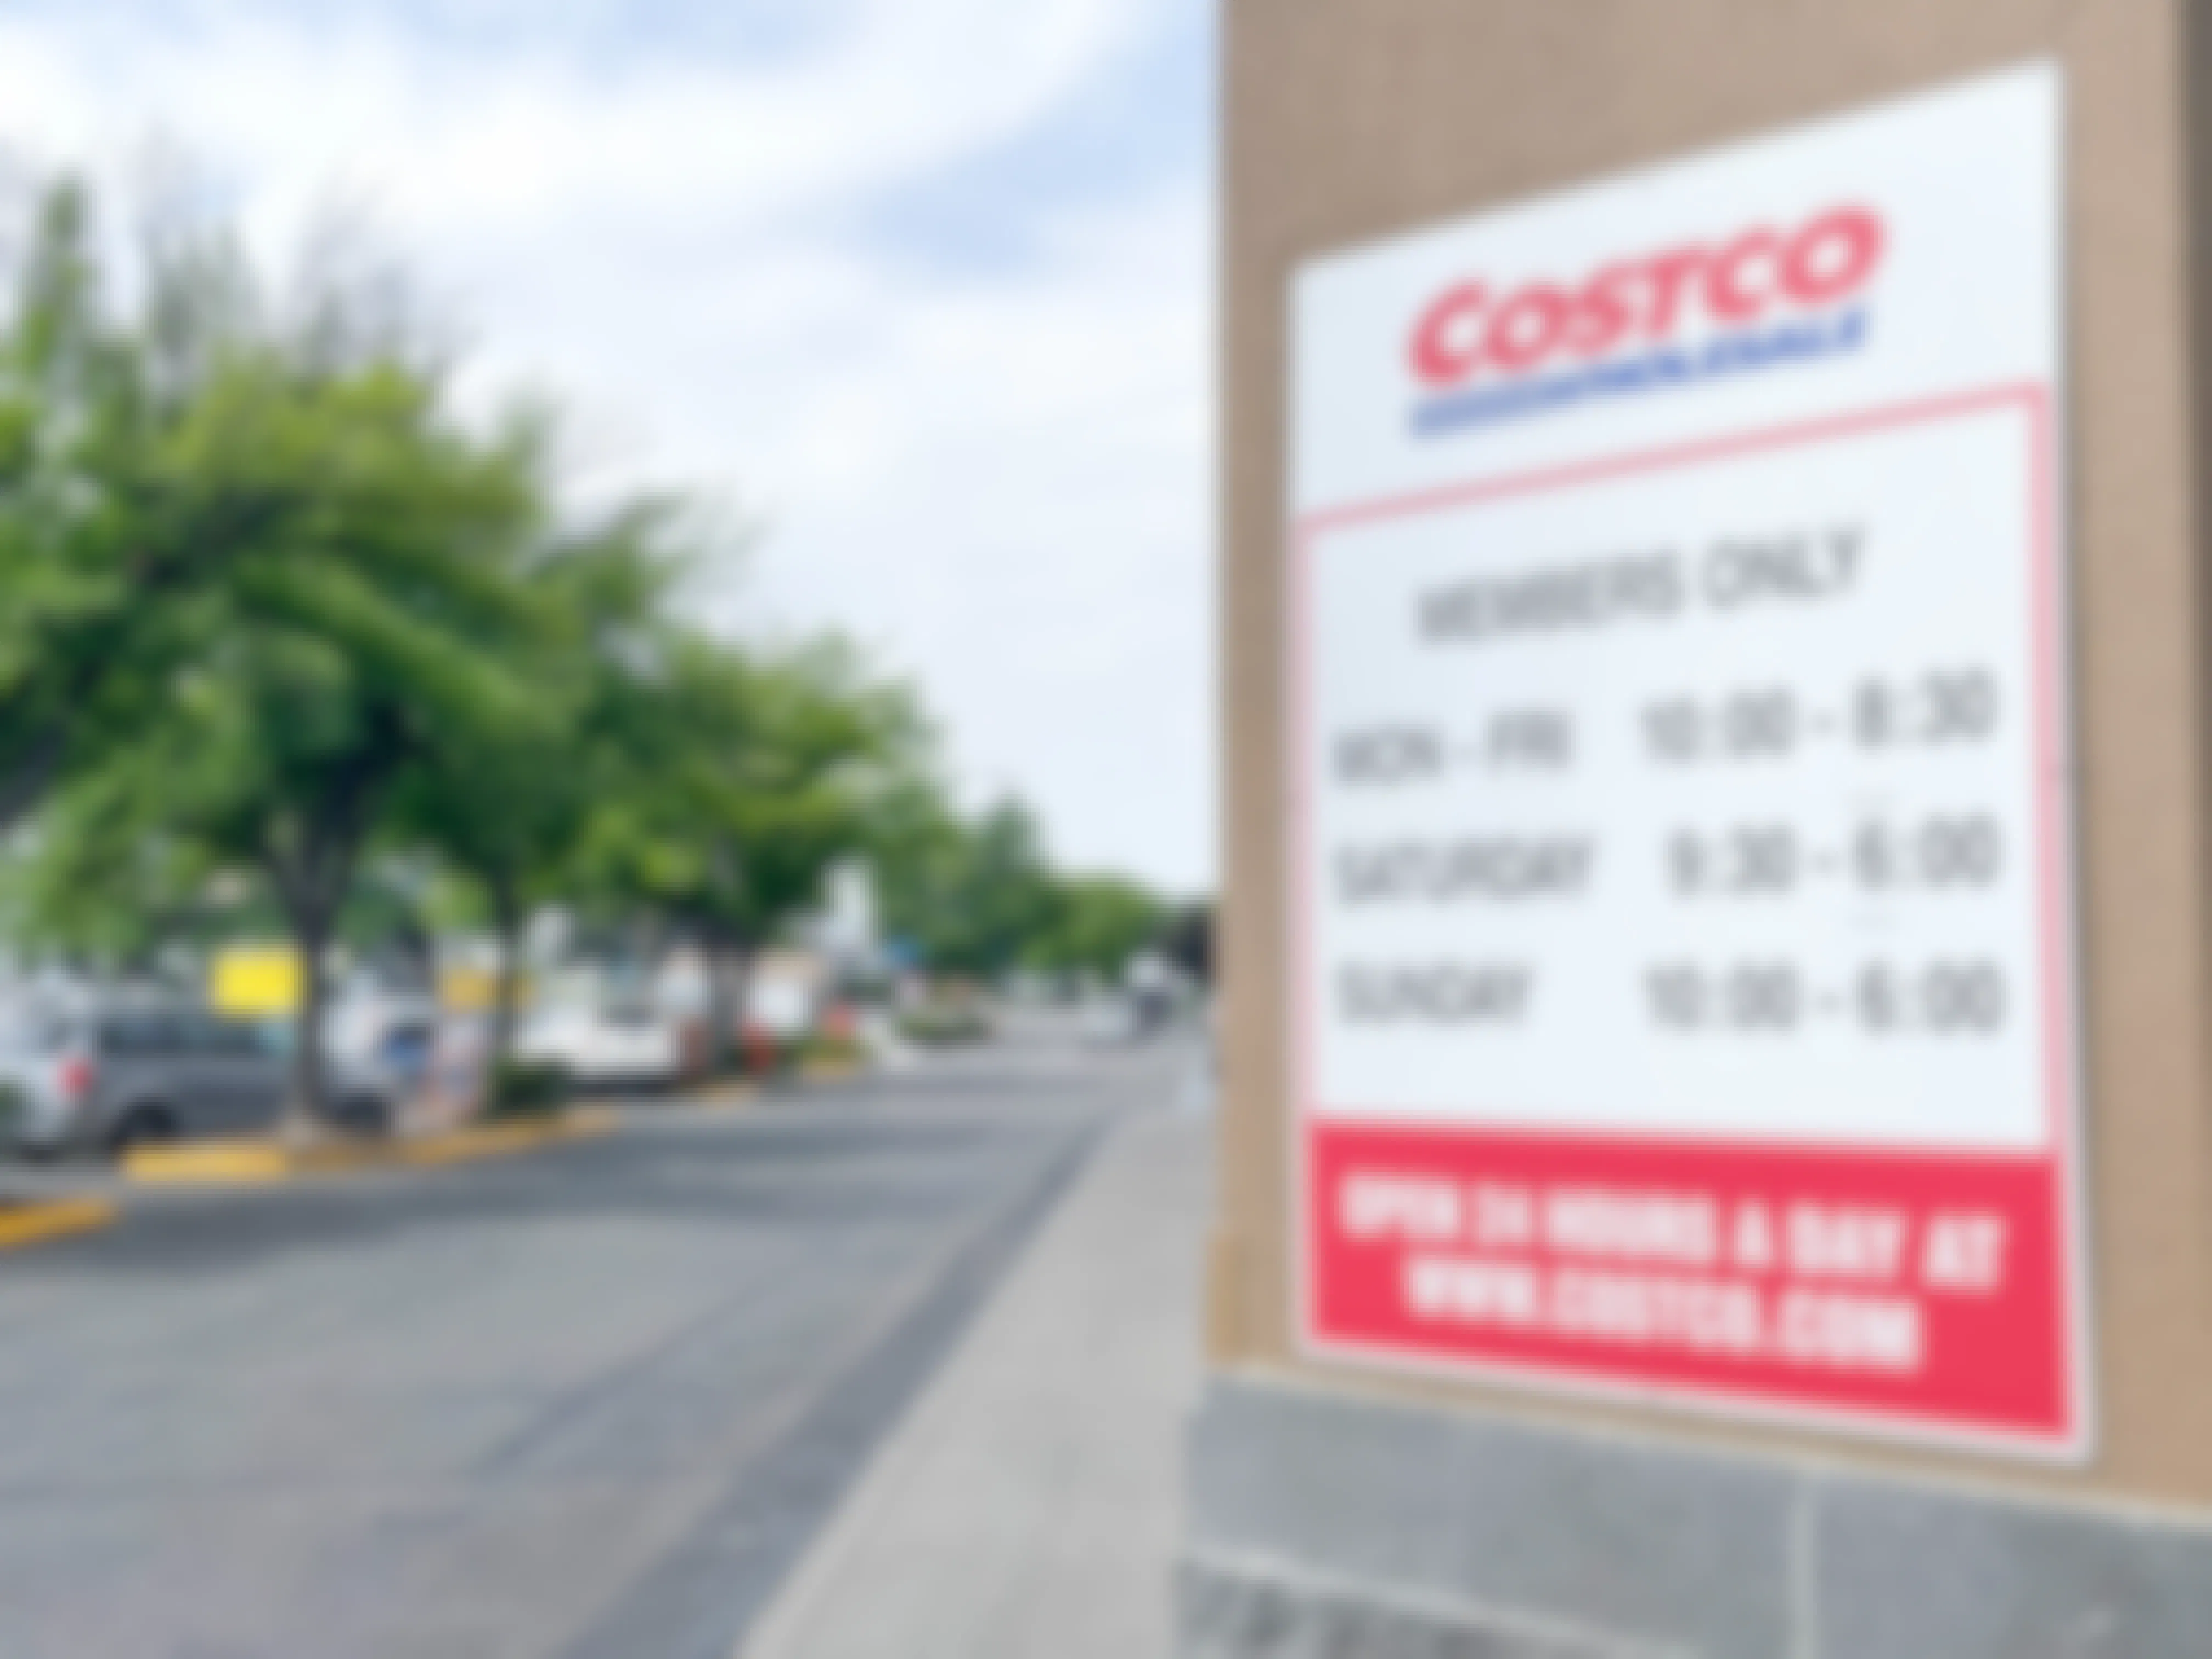 costco members only hours sign outside store